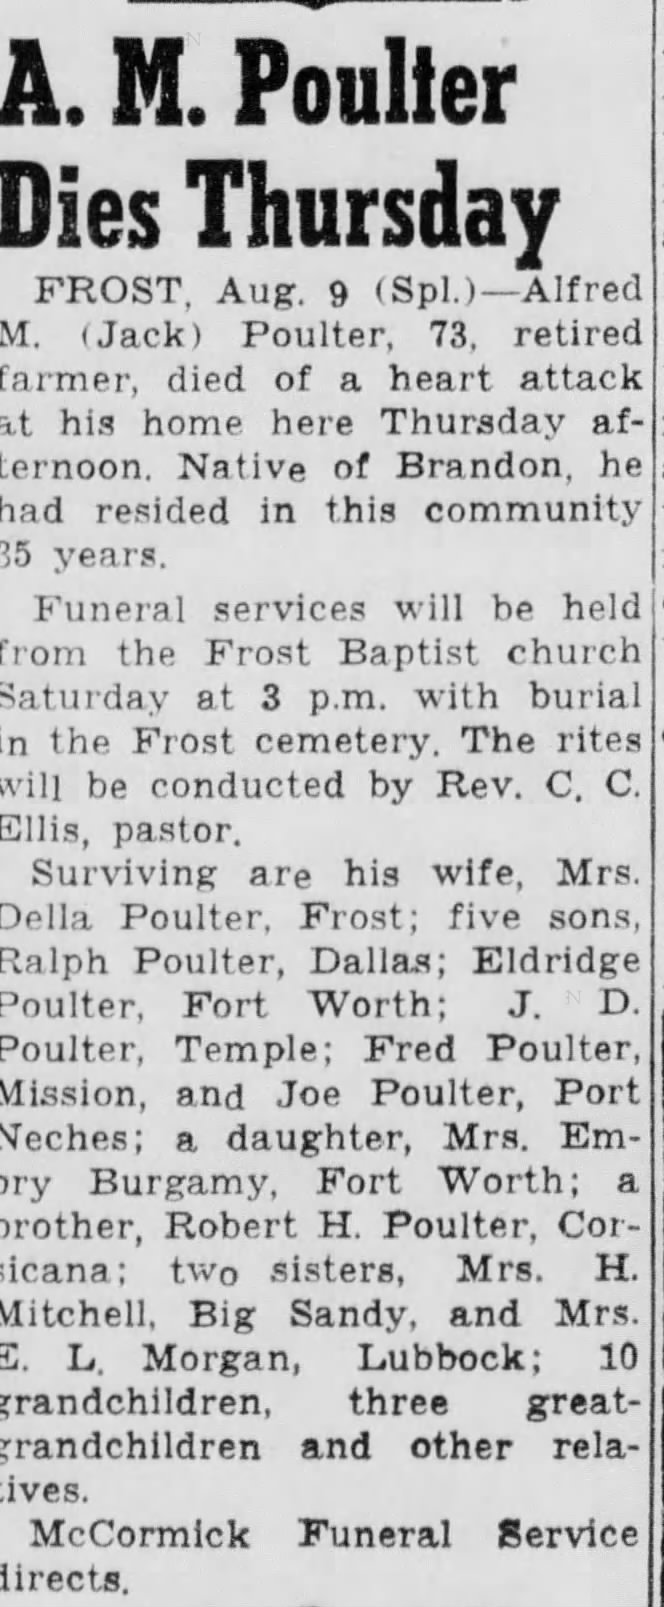 Obituary for A. N. Poulter